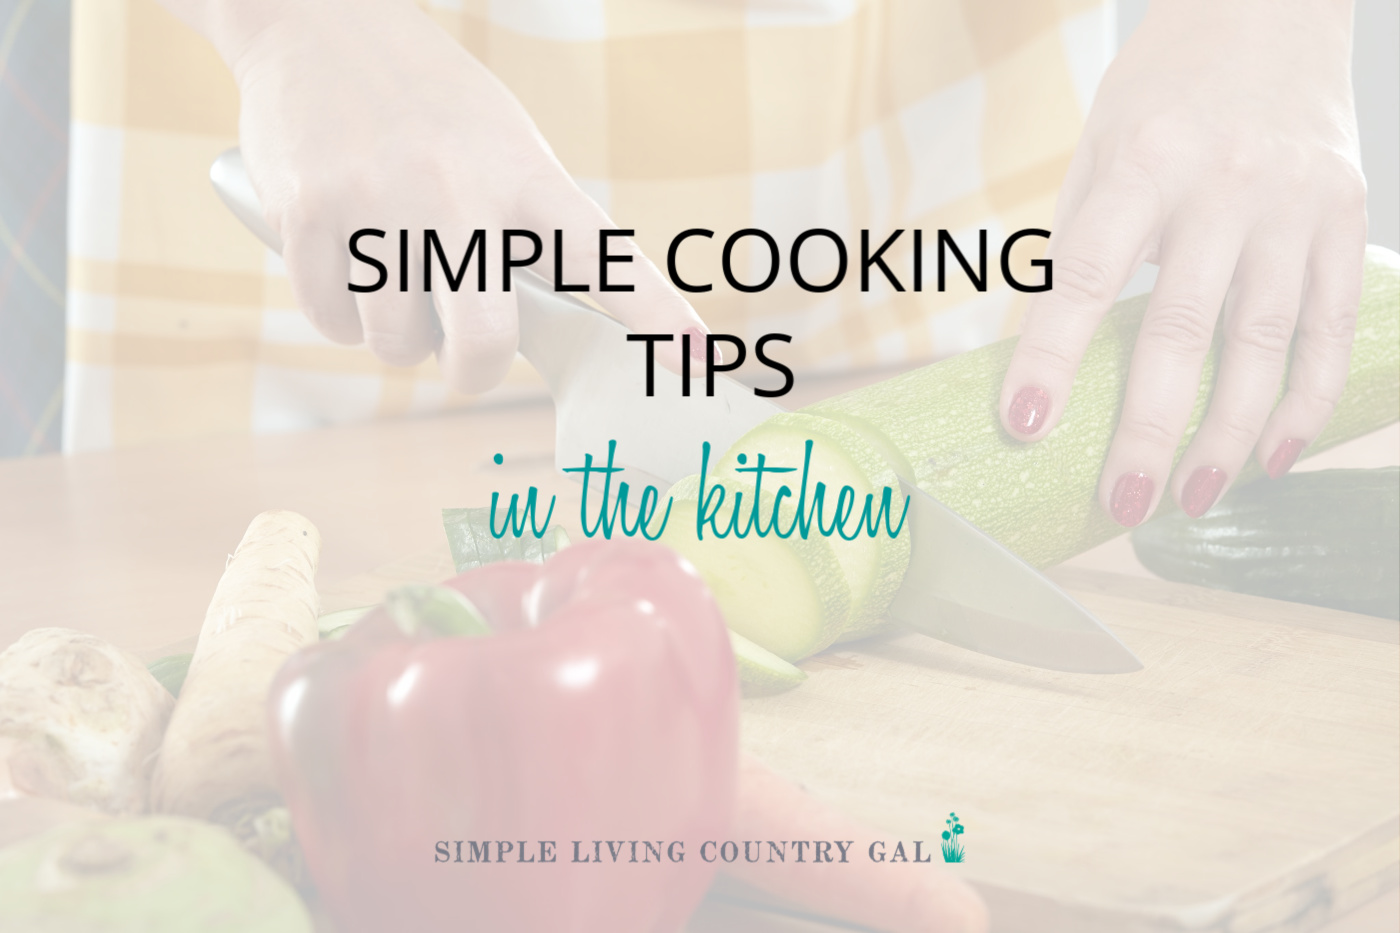 Dicing Food Simple Cooking Tips For The Kitchen 2 